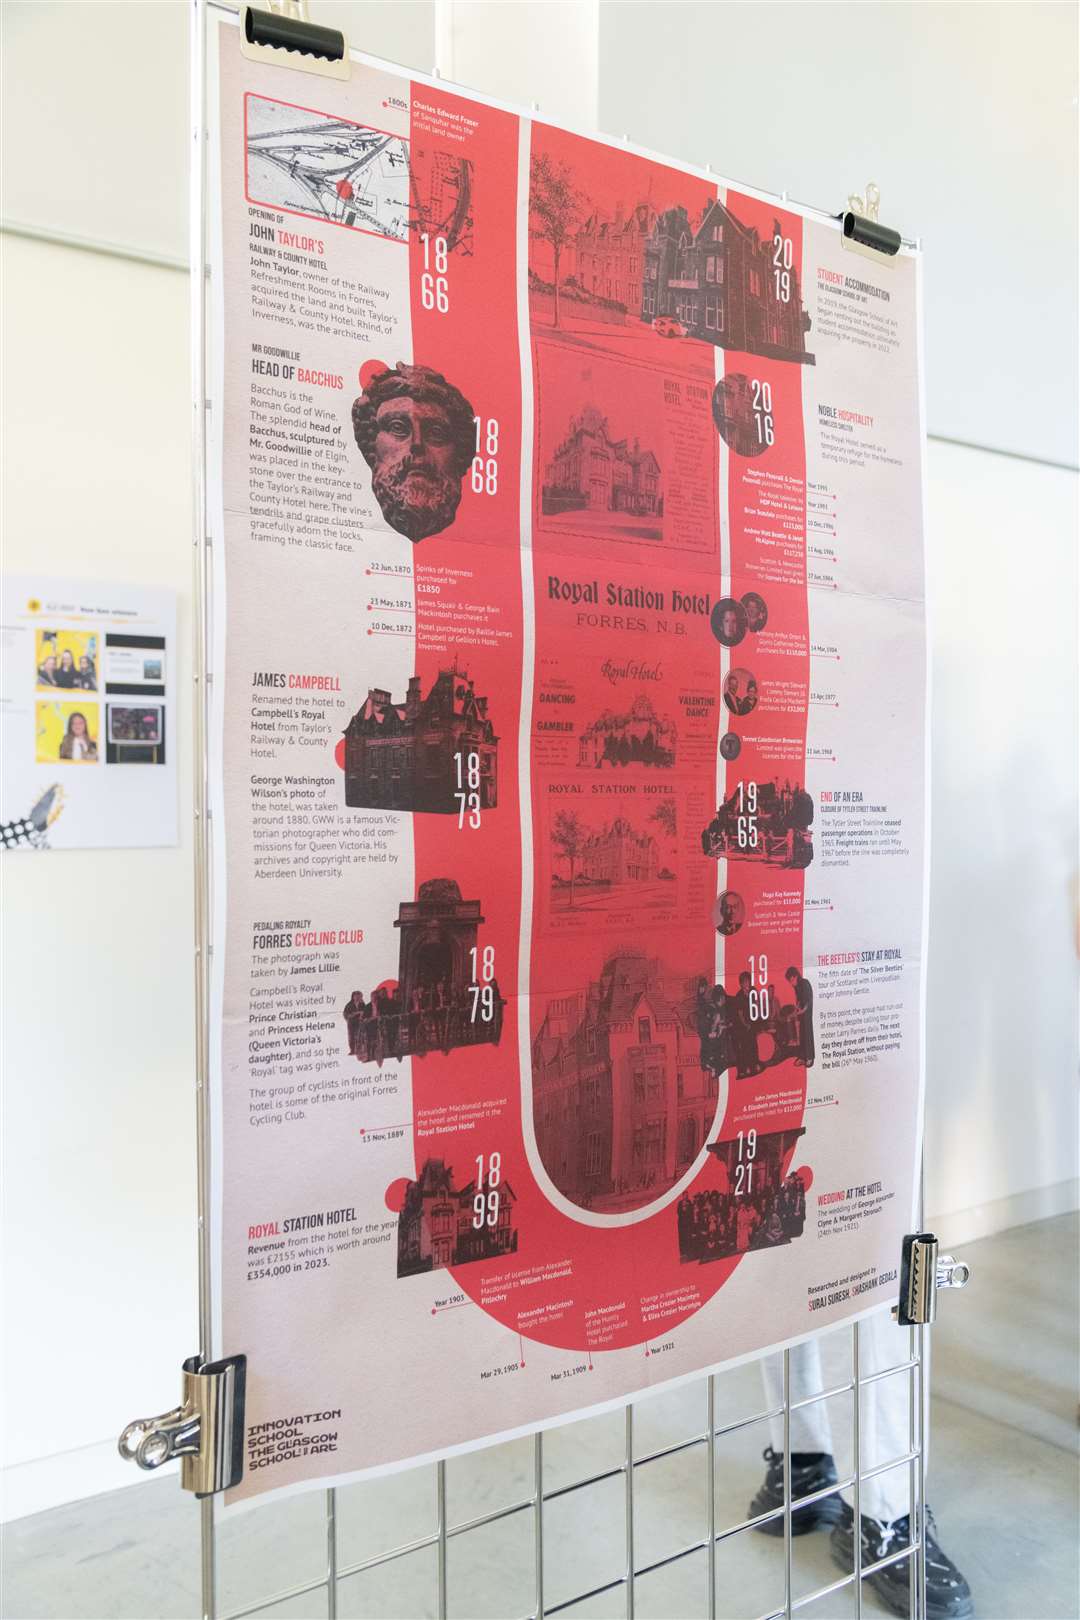 The poster was one of the projects on show at the Glasgow School of Art Exhibition held at Blairs Farm Steading earlier this summer.